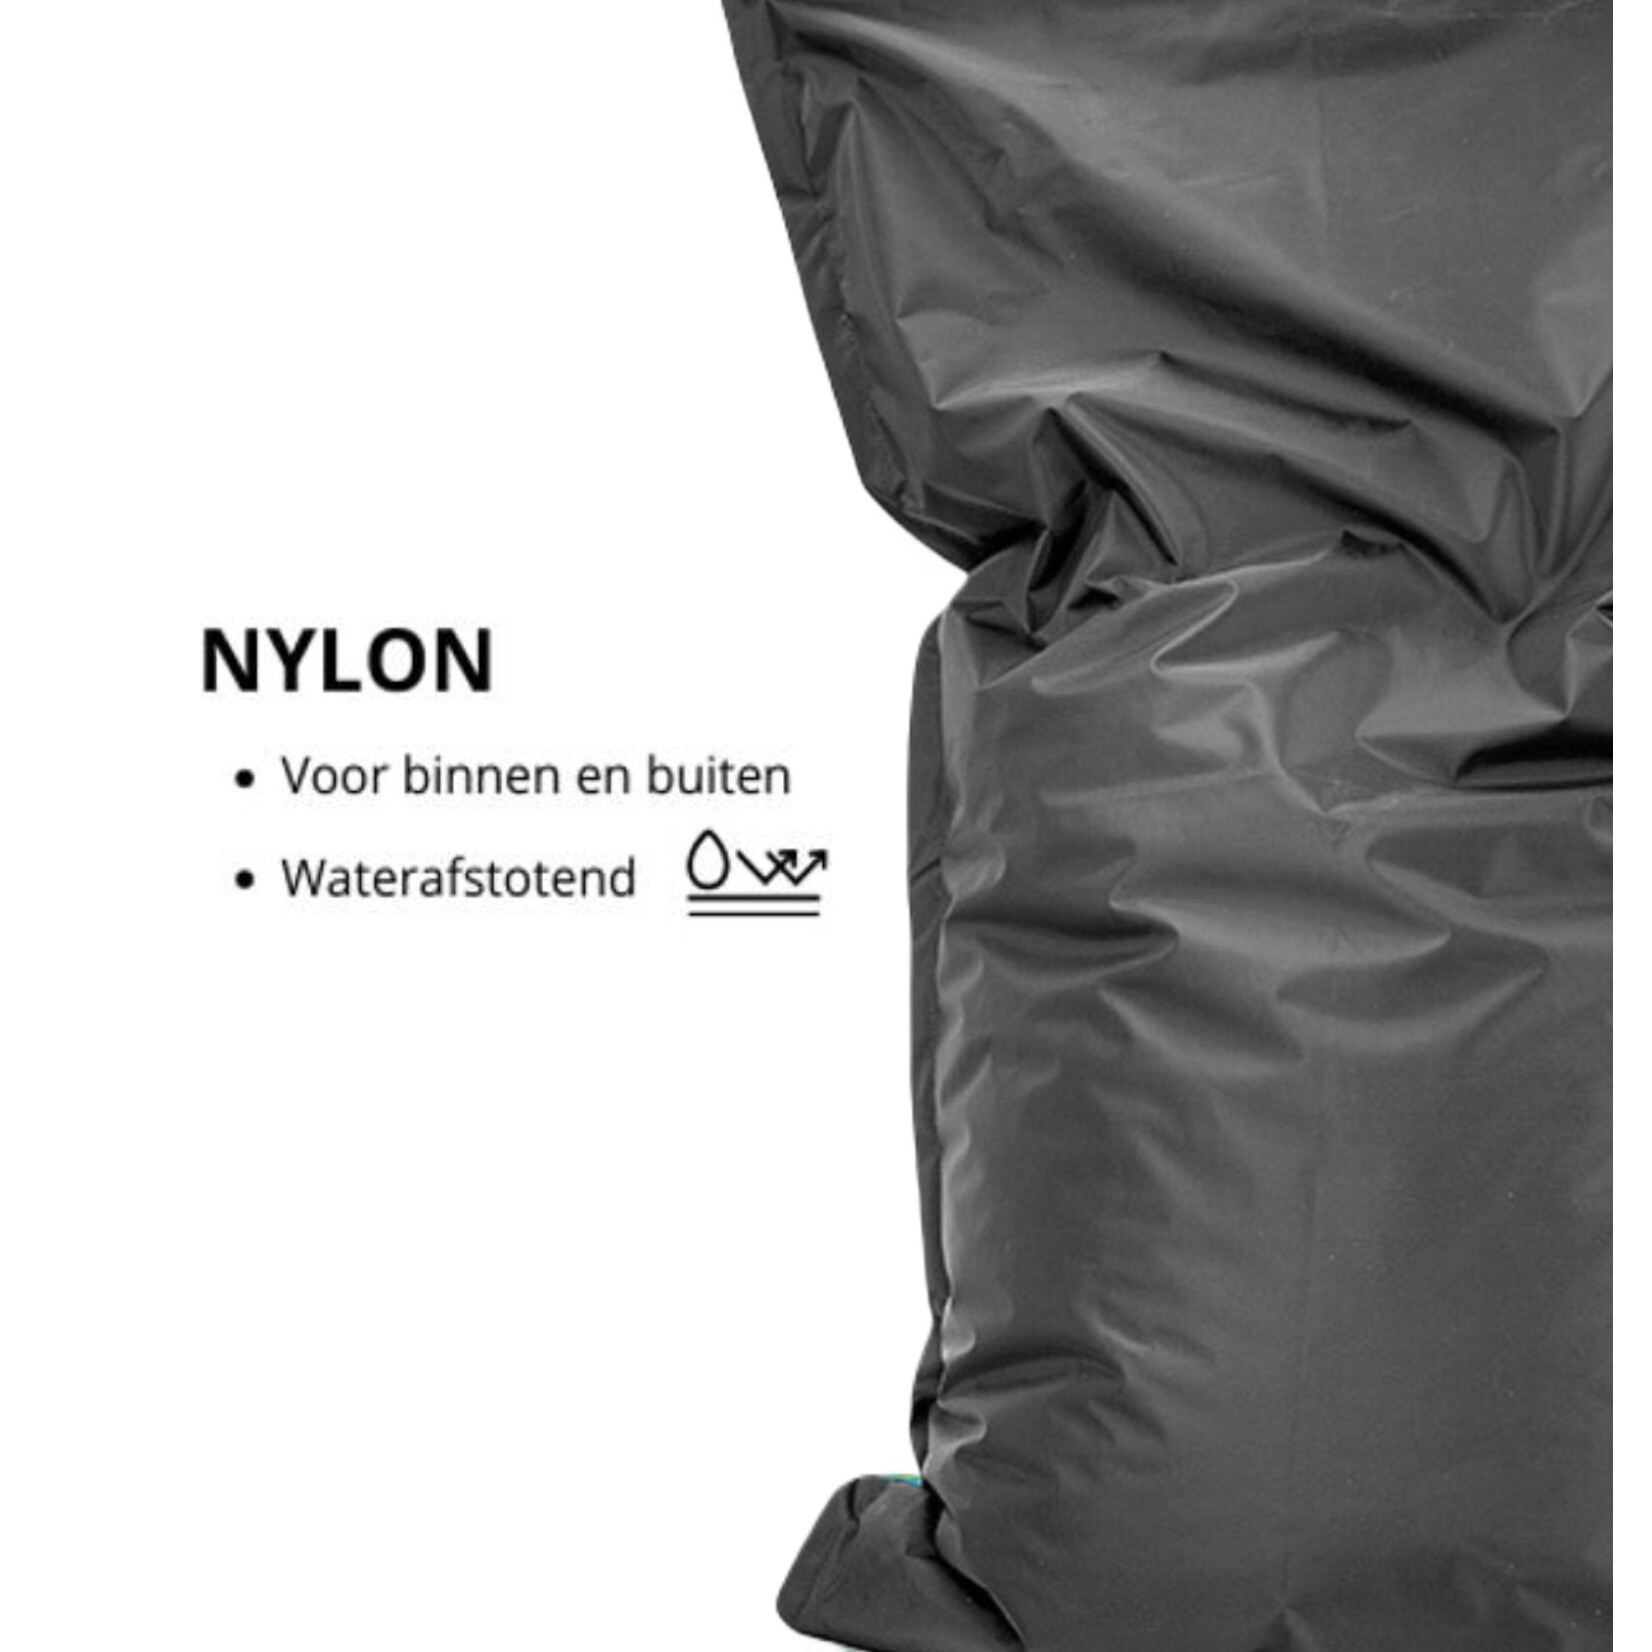 Parya Parya Home - Beanbag Bella - Spacious beanbags - Cushion - Nylon - 100x150 cm - For Indoor and Outdoor - Anthracite